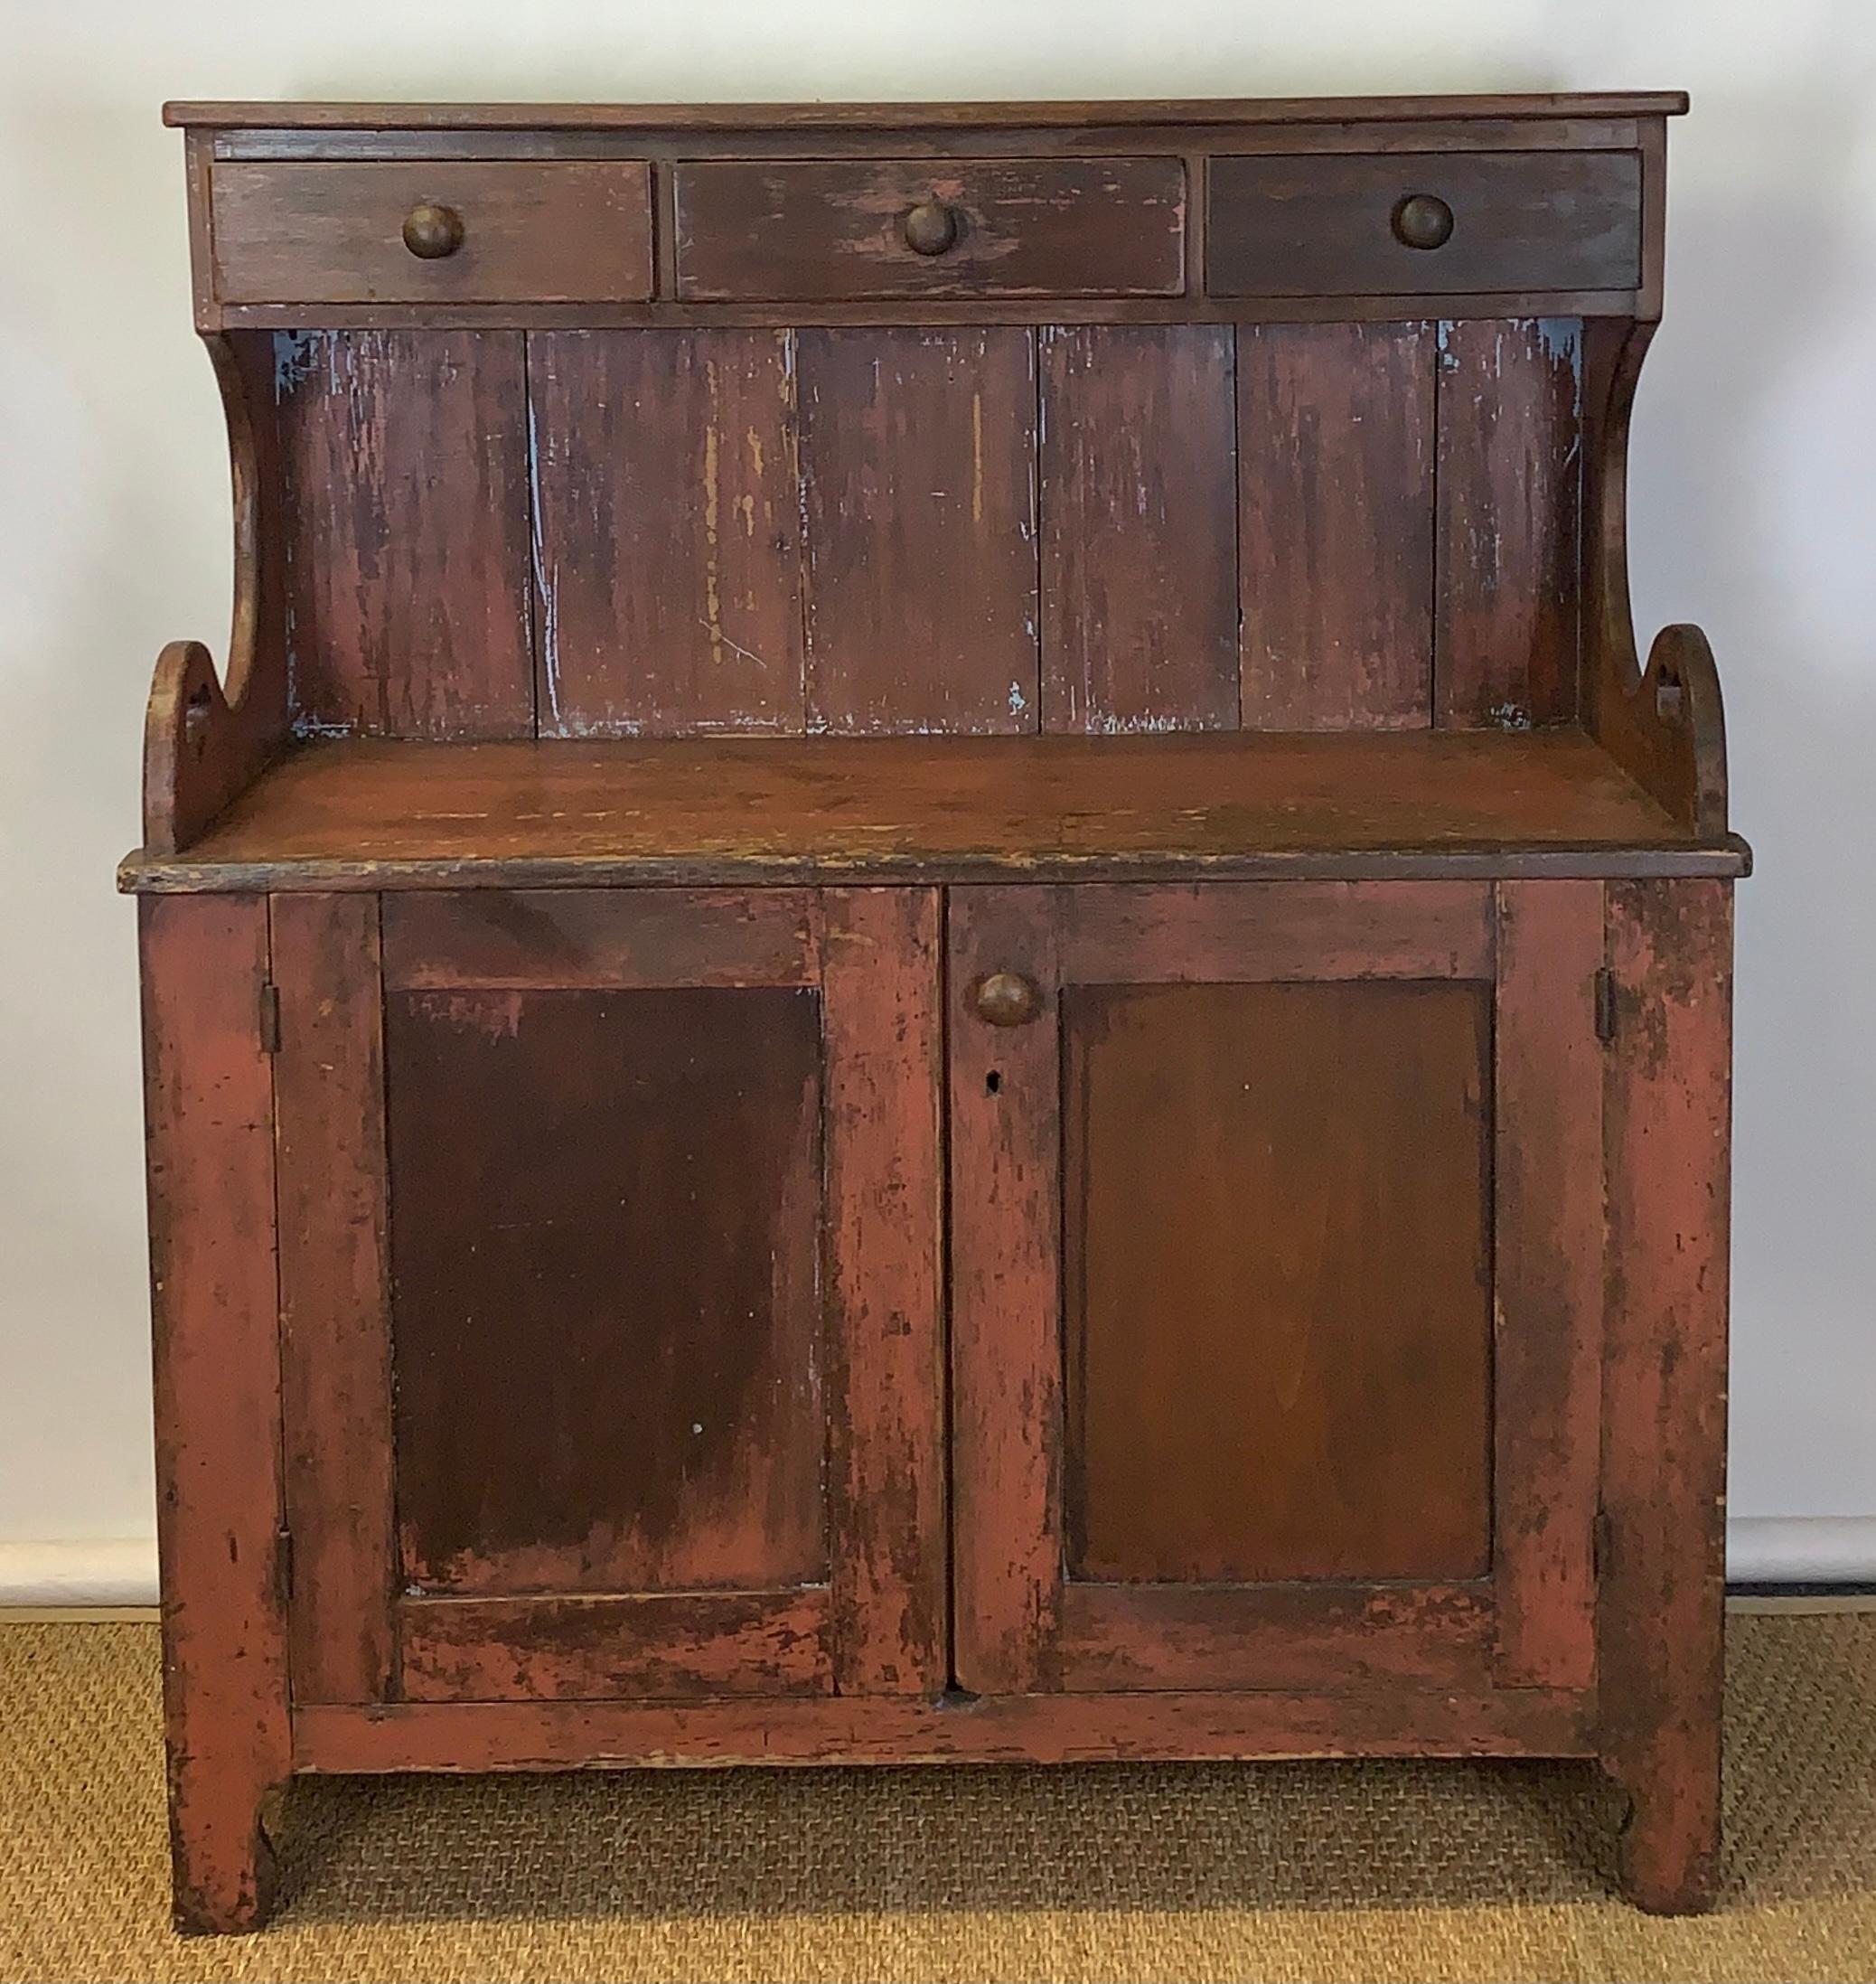 Hand-Crafted 19th Century American Primitive Dry Sink or Cabinet